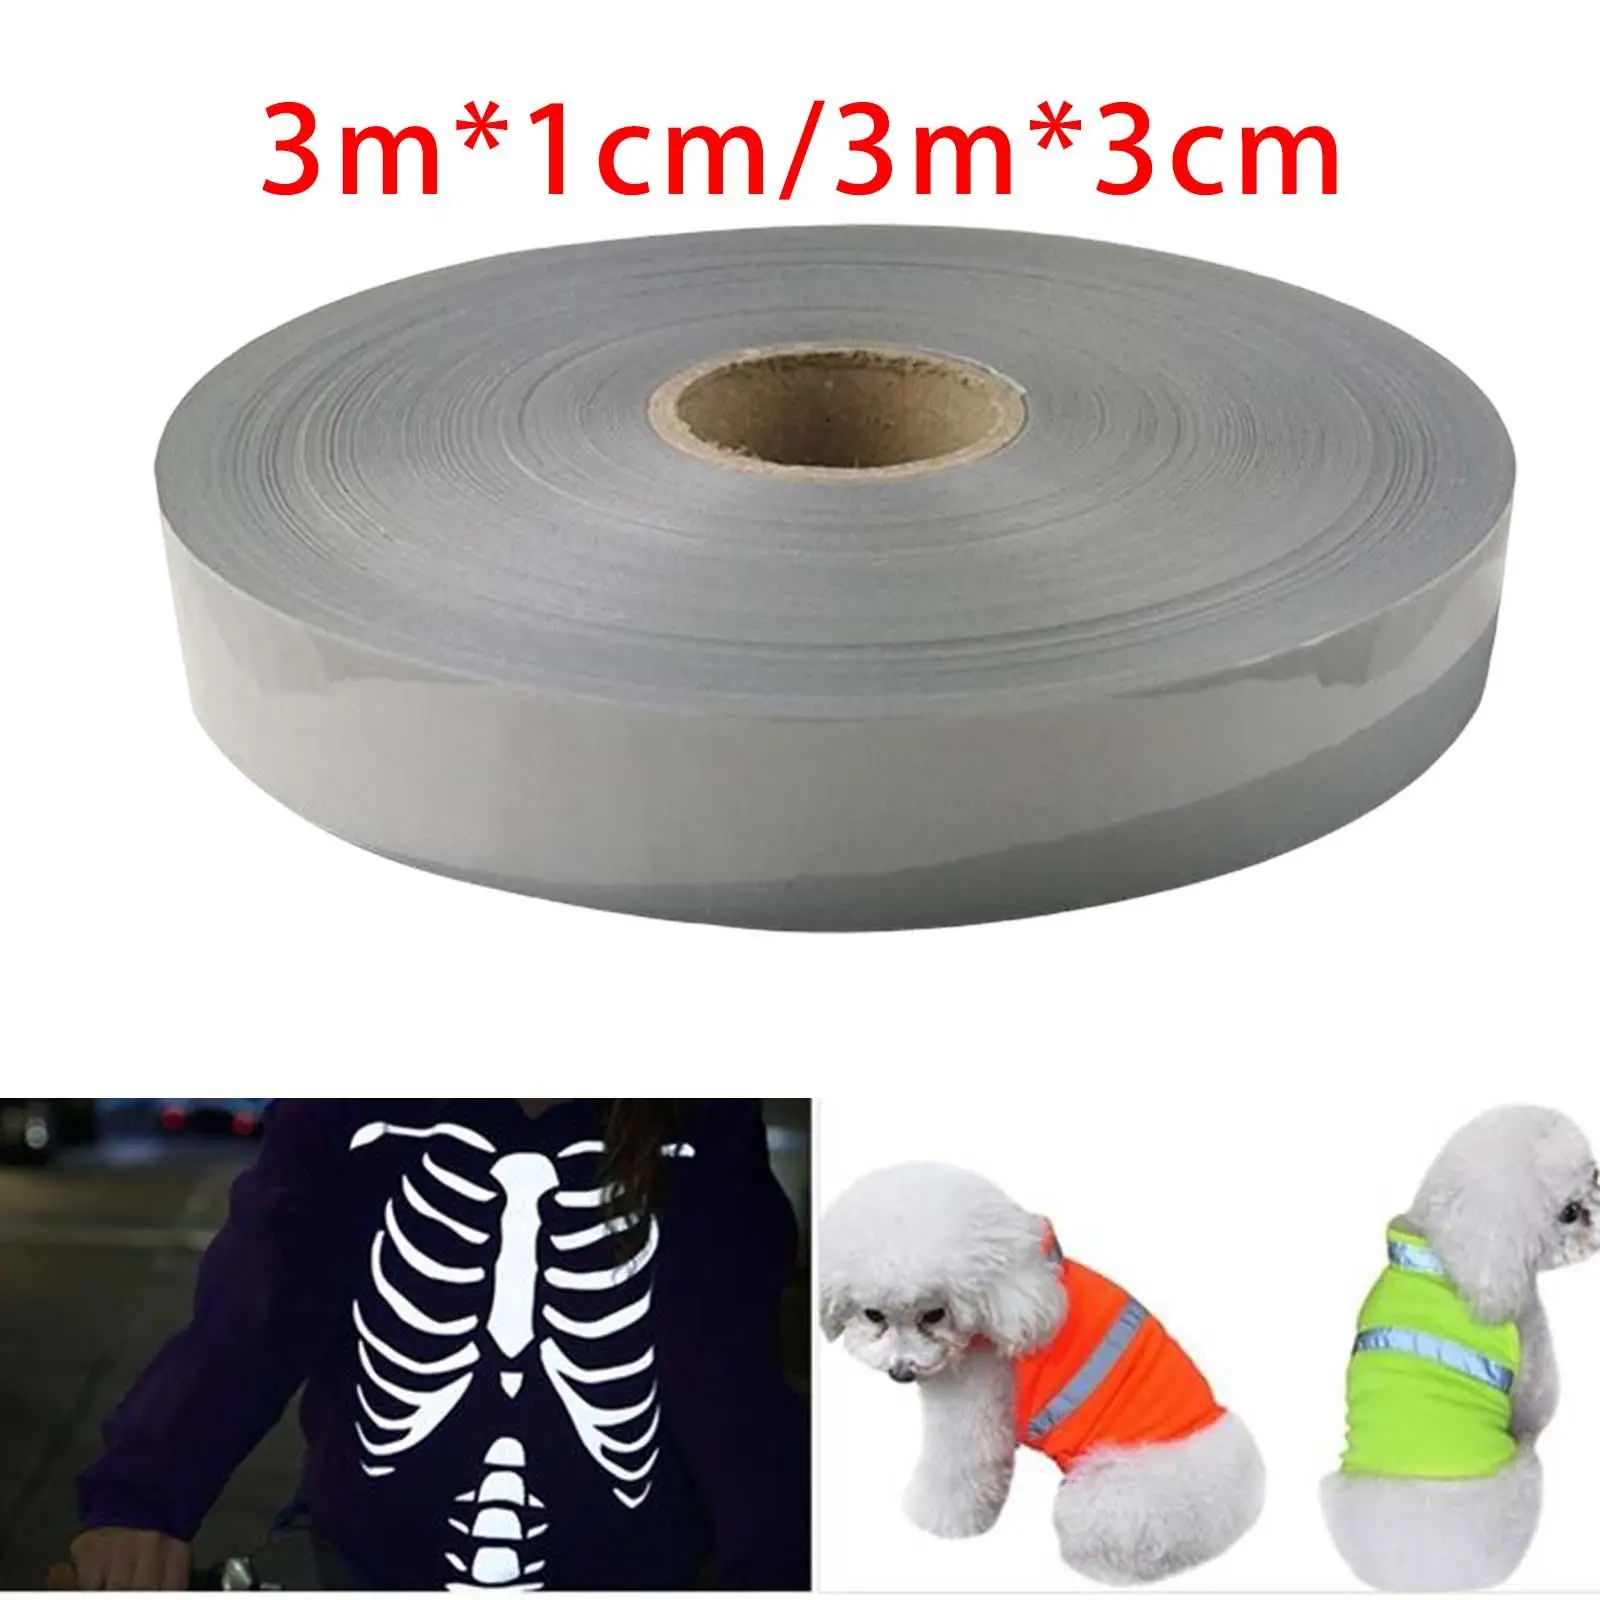 Iron On Reflective Tape Durable DIY Heat Transfer Vinyl Film Reflector Tape Waterproof Fabric for Clothes Pants Outdoor